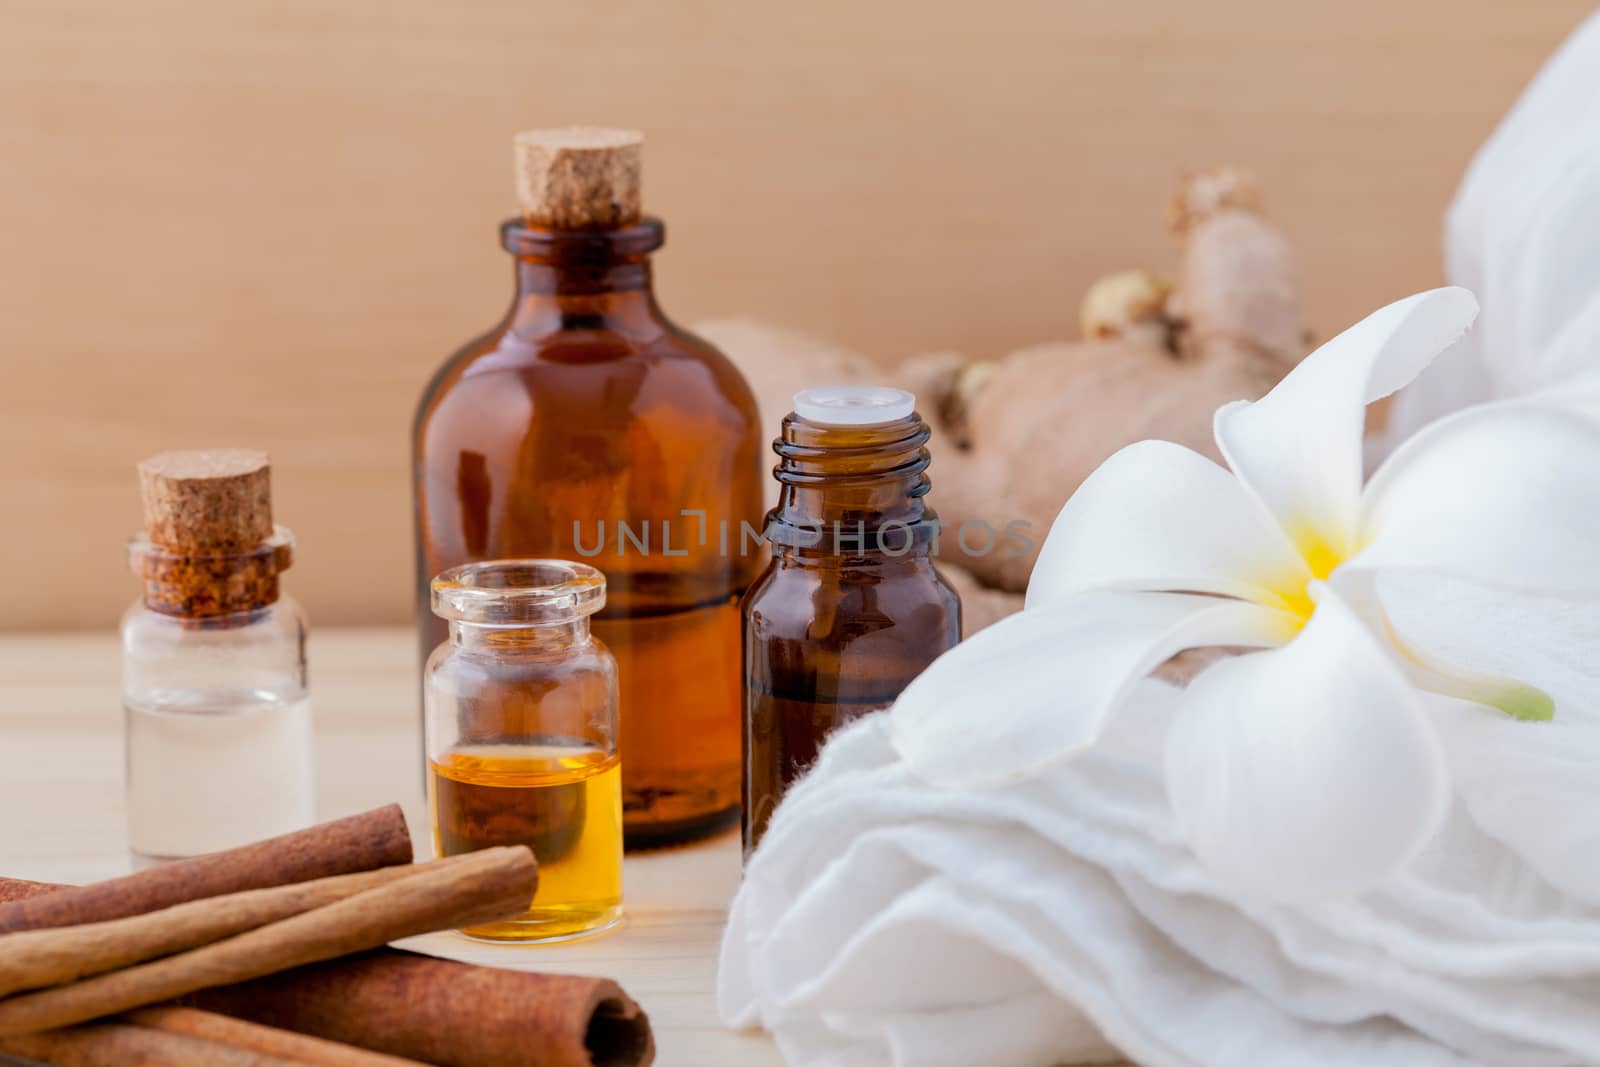 Spa Essential Oil - Natural Spas Ingredients for aroma aromather by kerdkanno